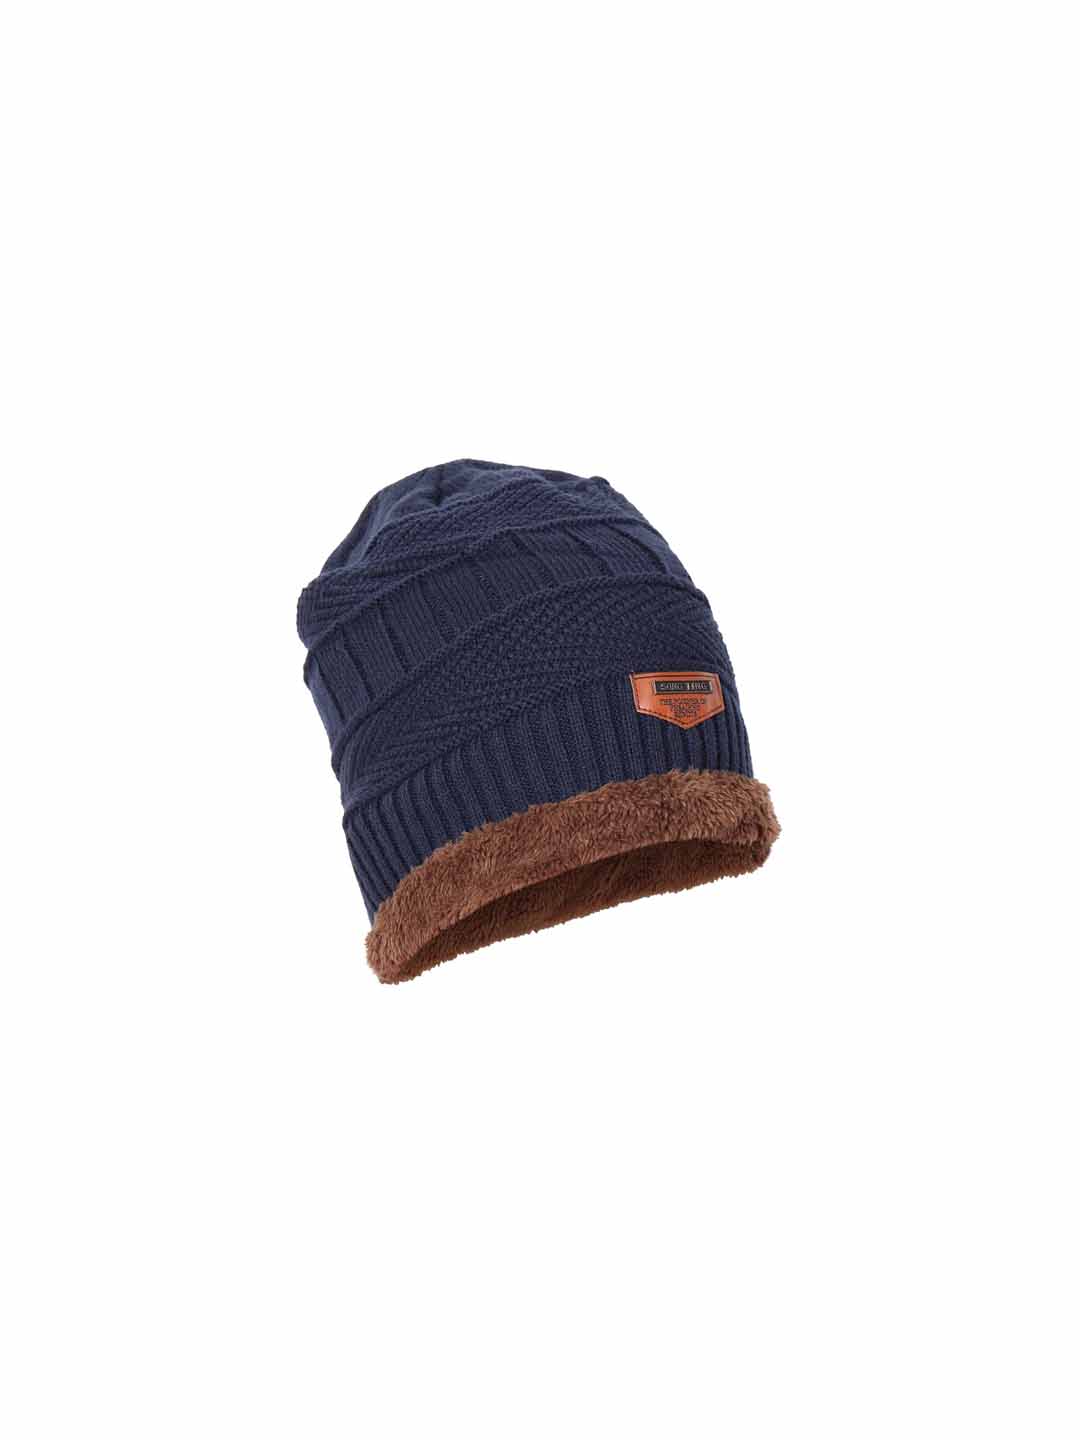 iSWEVEN Unisex Blue Self Design Beanie Price in India